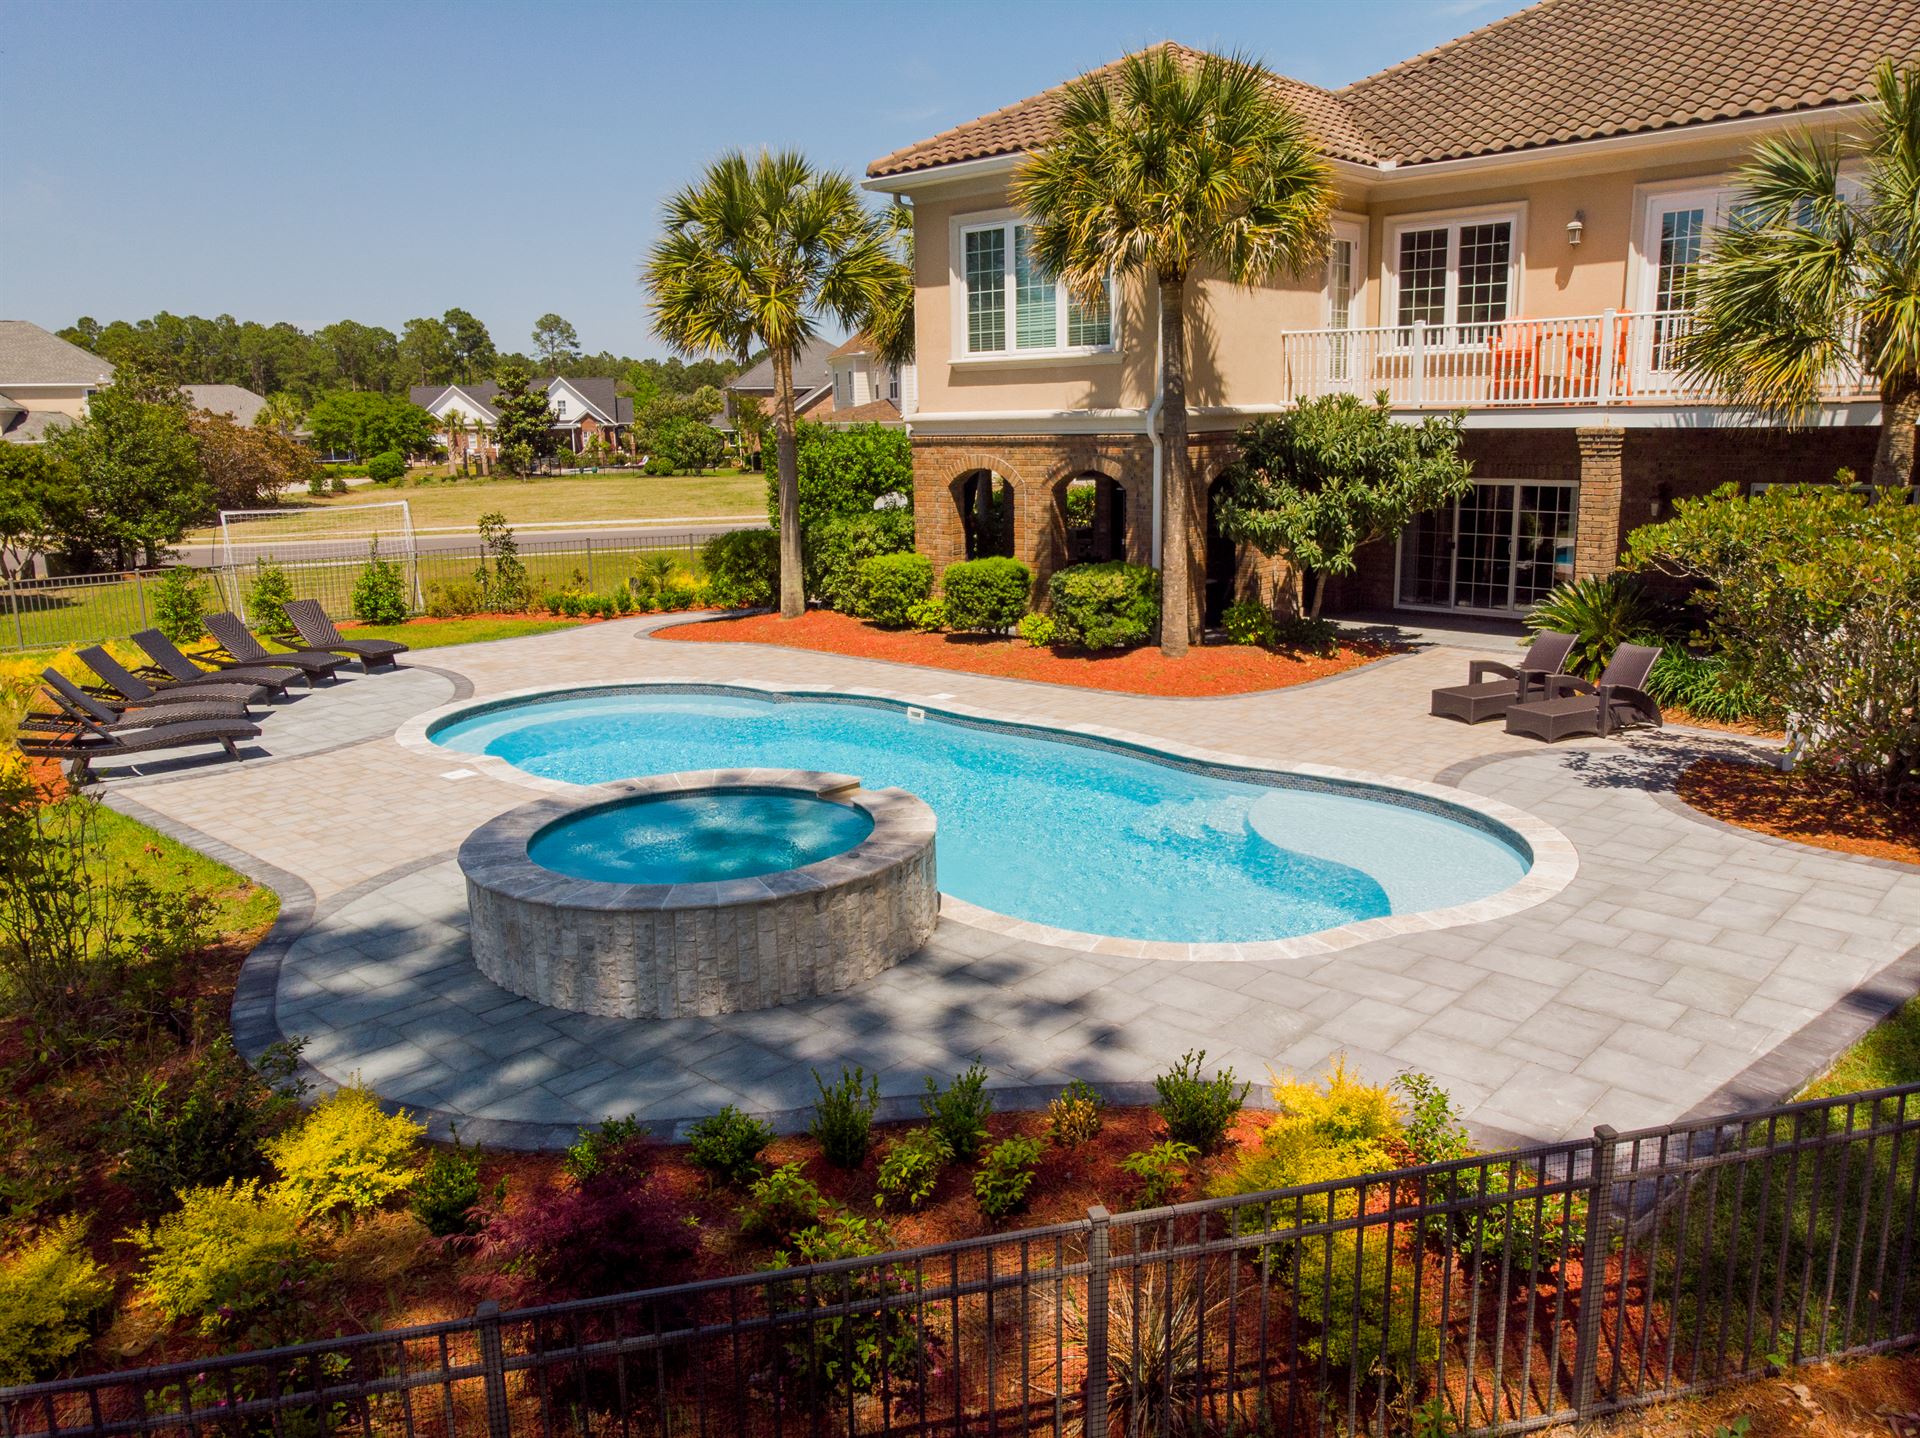 River Pools C40 + RS08 with spillway in Caribbean Sparkle with concrete paver patio and natural stone coping